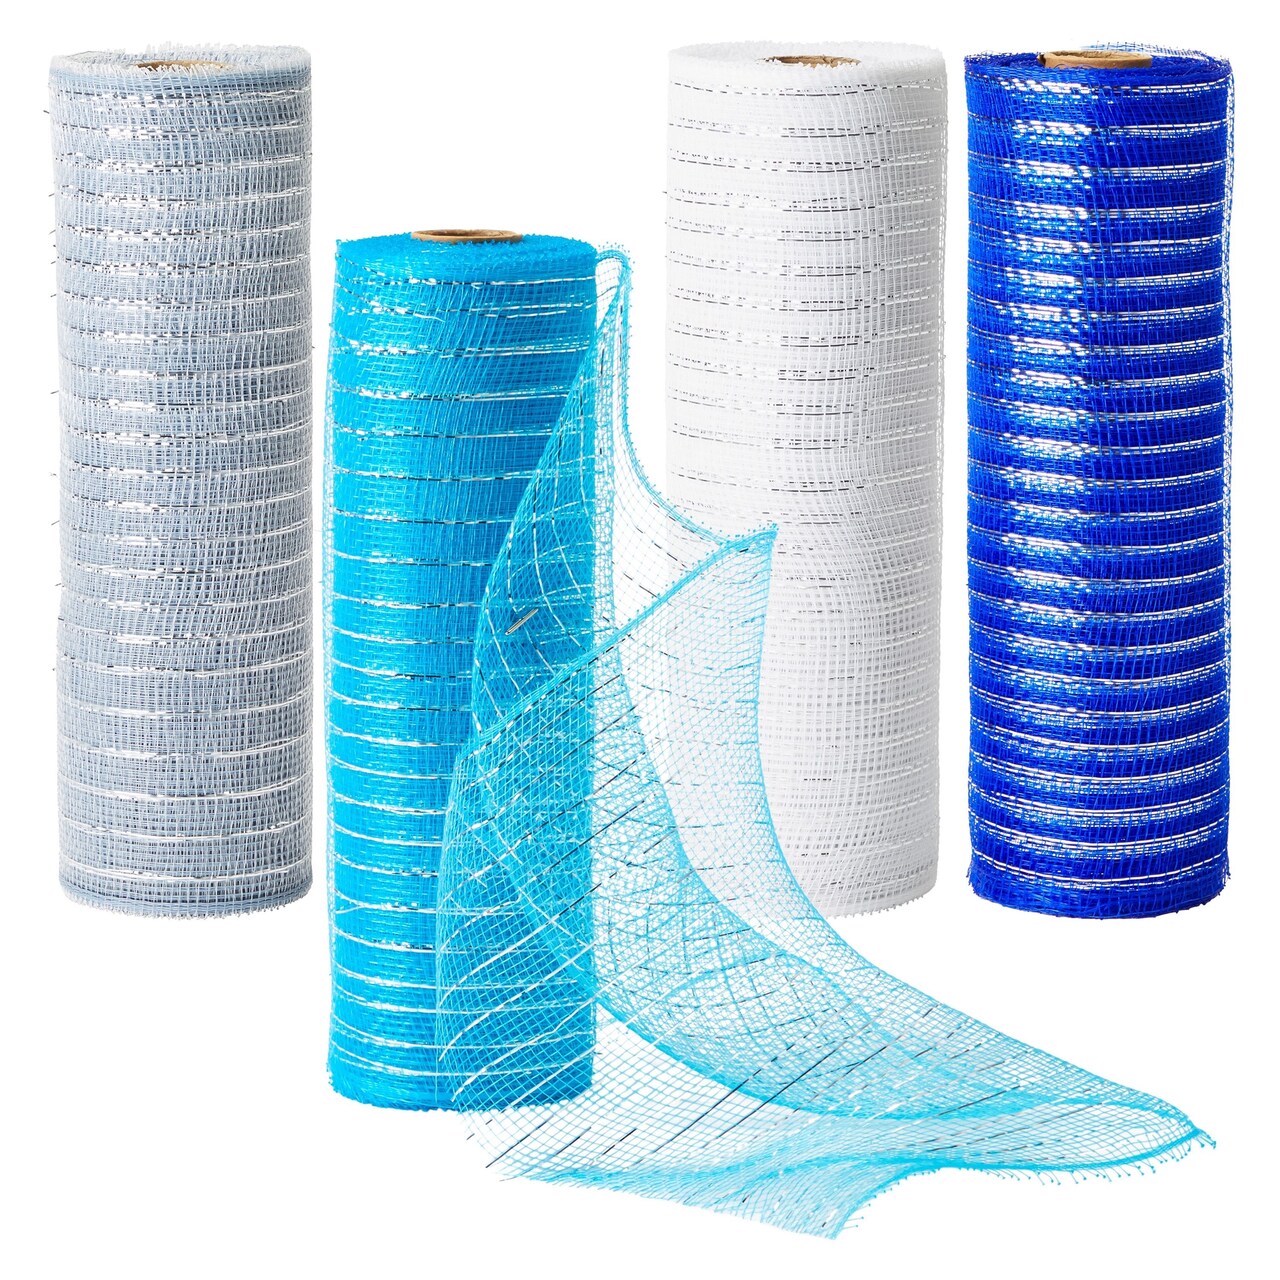 4 Pack 10 Inch Deco Mesh Ribbon Rolls for Easter Wreath, Craft Mesh,  Metallic Poly Burlap in Blue, Silver, White, and Royal Blue, 10 In x 30 Ft  (10 Yd)